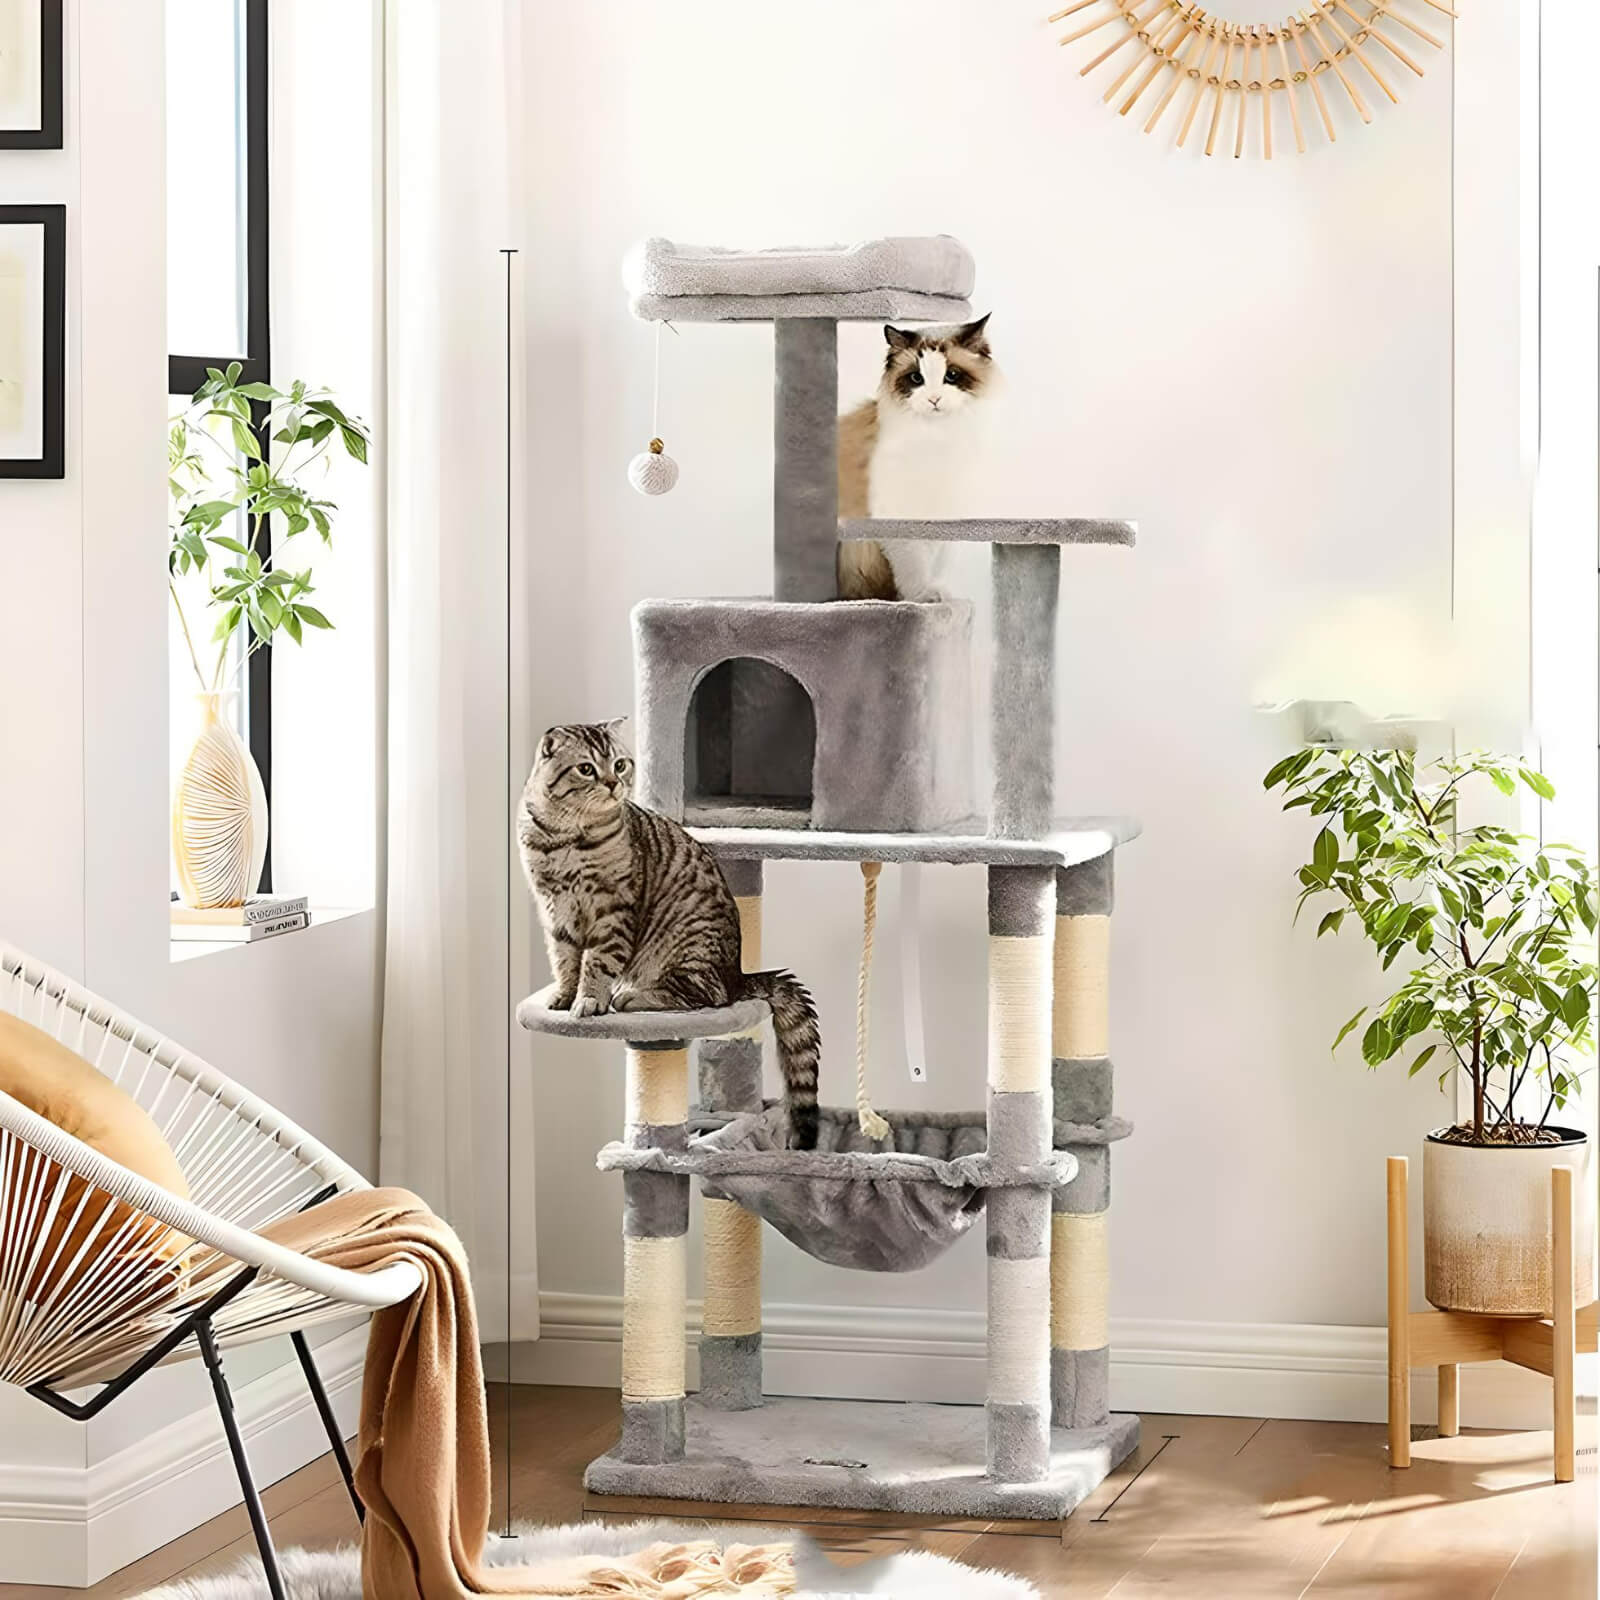 two-cats-sitting-on-cat-tree-with-hammock